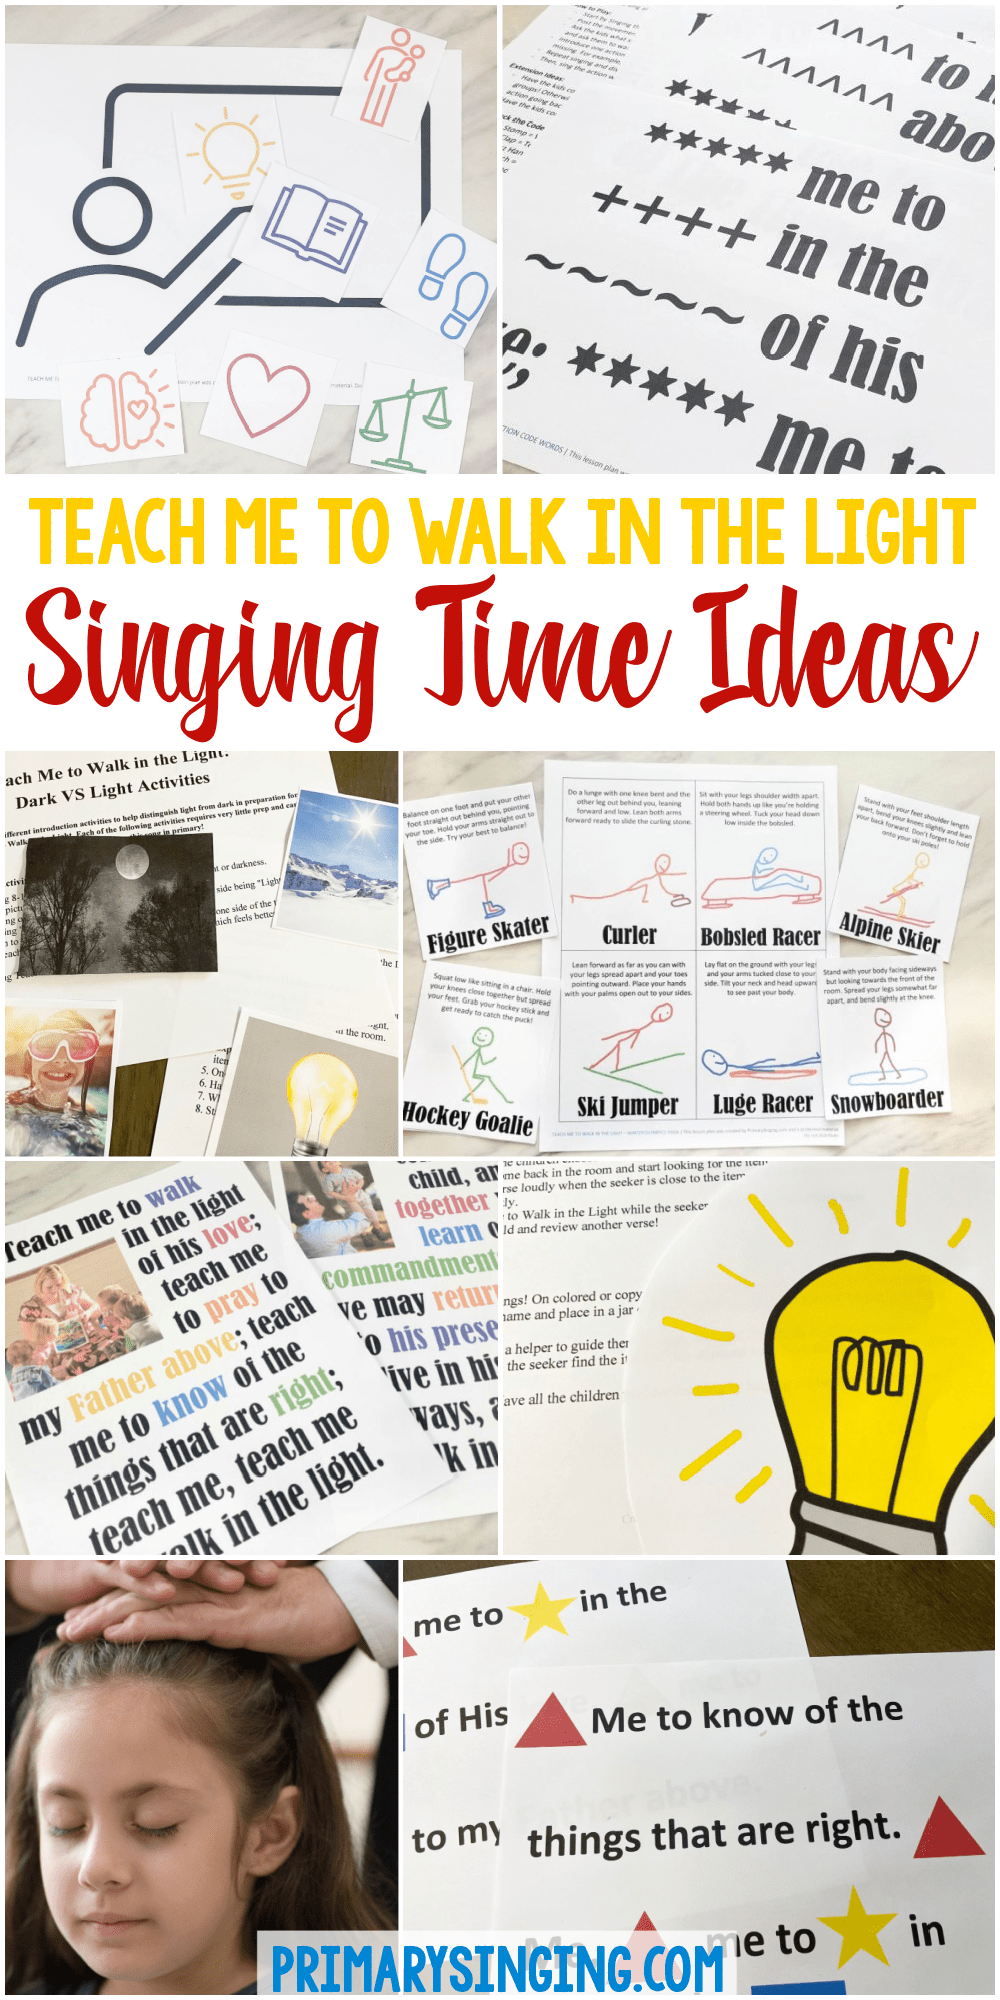 Teach Me to Walk in the Light Singing Time Ideas for LDS Primary music leaders including 20 fun ways to teach this song in Primary! Rebus, action code words, light vs dark, sports yoga and more! Printable song helps for teaching Teach Me to Walk in the Light song in Primary.